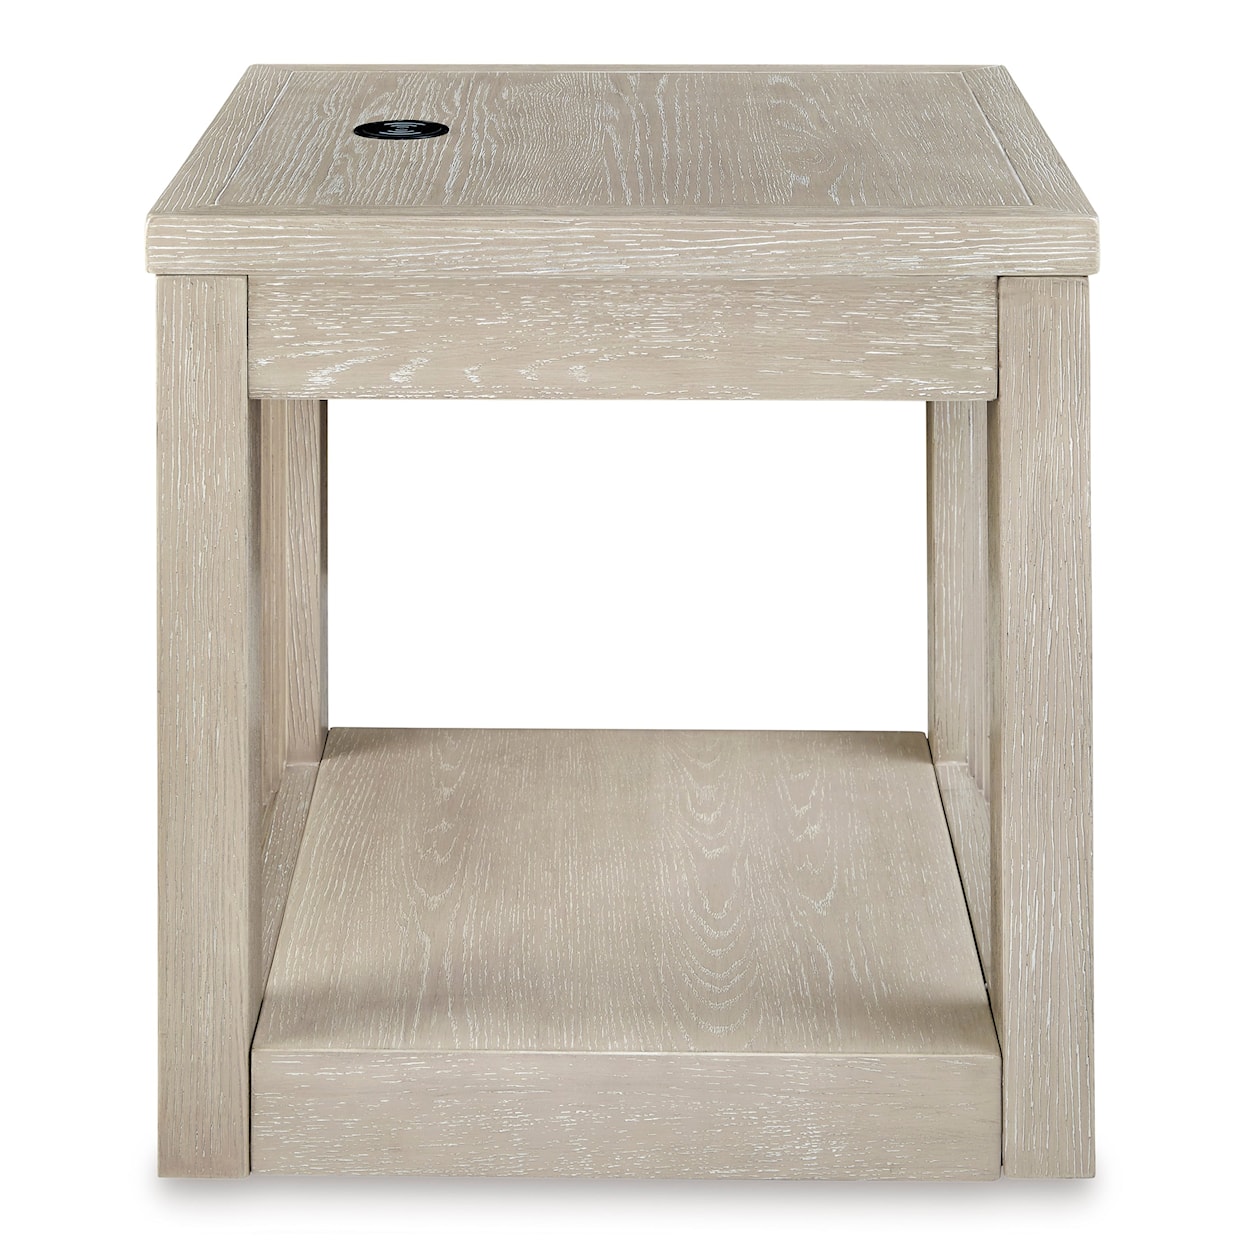 Signature Design by Ashley Marxhart Square End Table